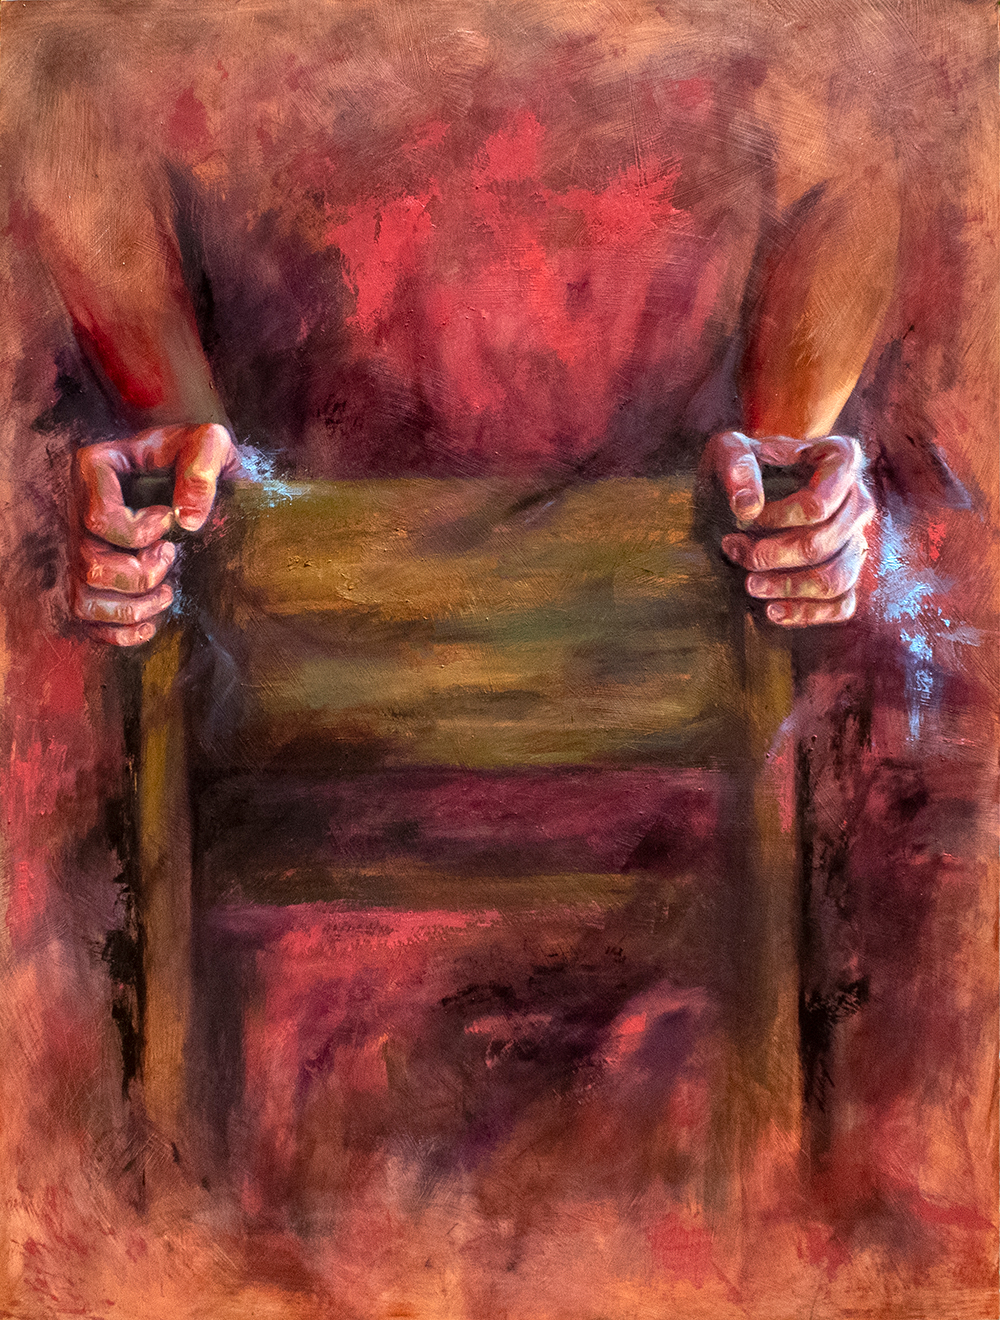 Two Hands tightly grip the form of a chair. Phasing into focus, they represent the tight grip of anxiety and depression.